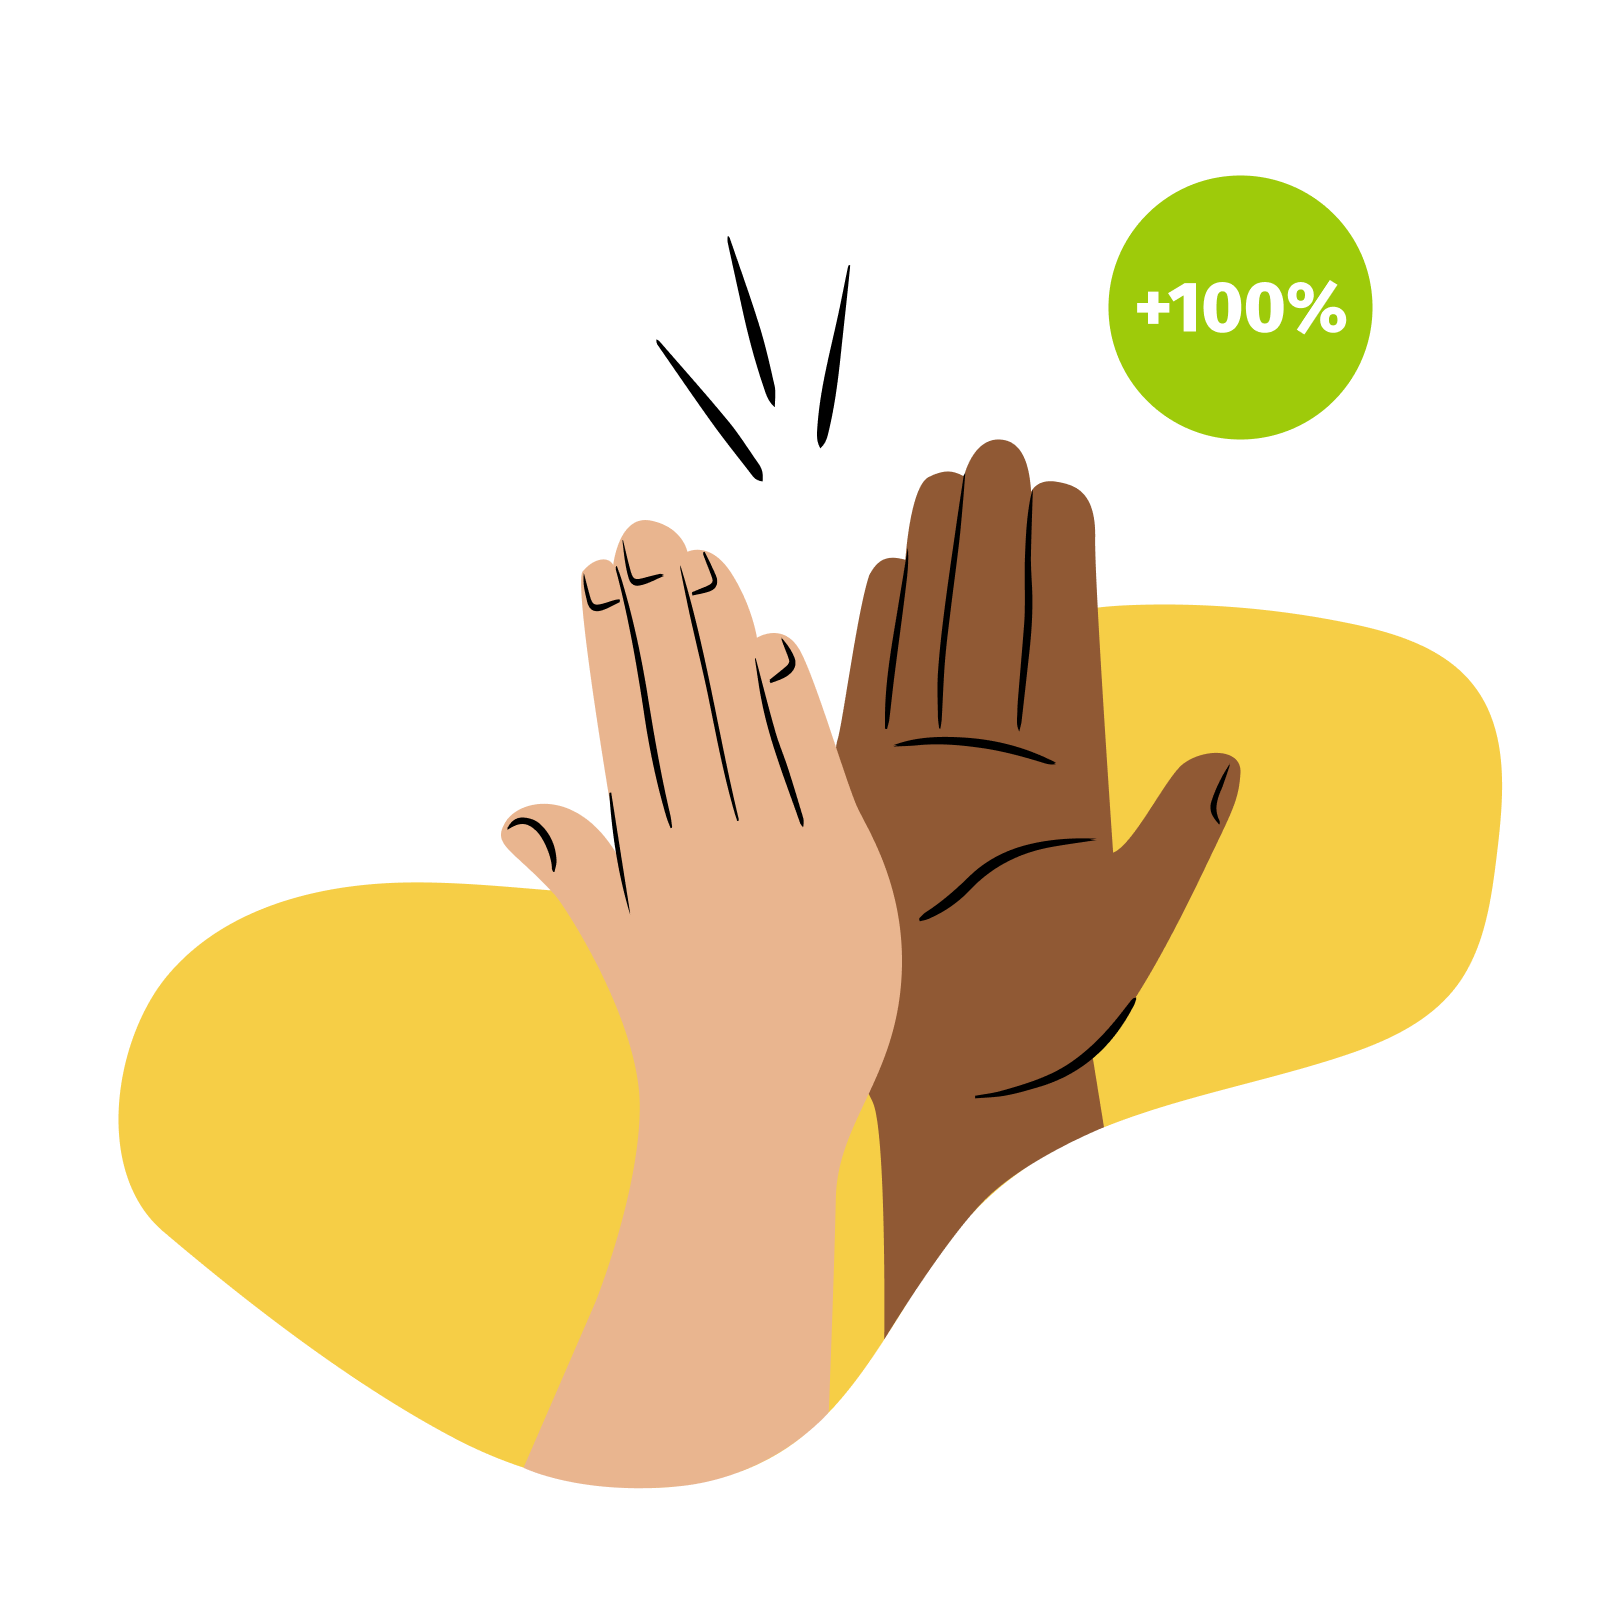 An illustrated graphic showing hands clapping. In the right-hand corner is an organic shape that says '+50 %'.